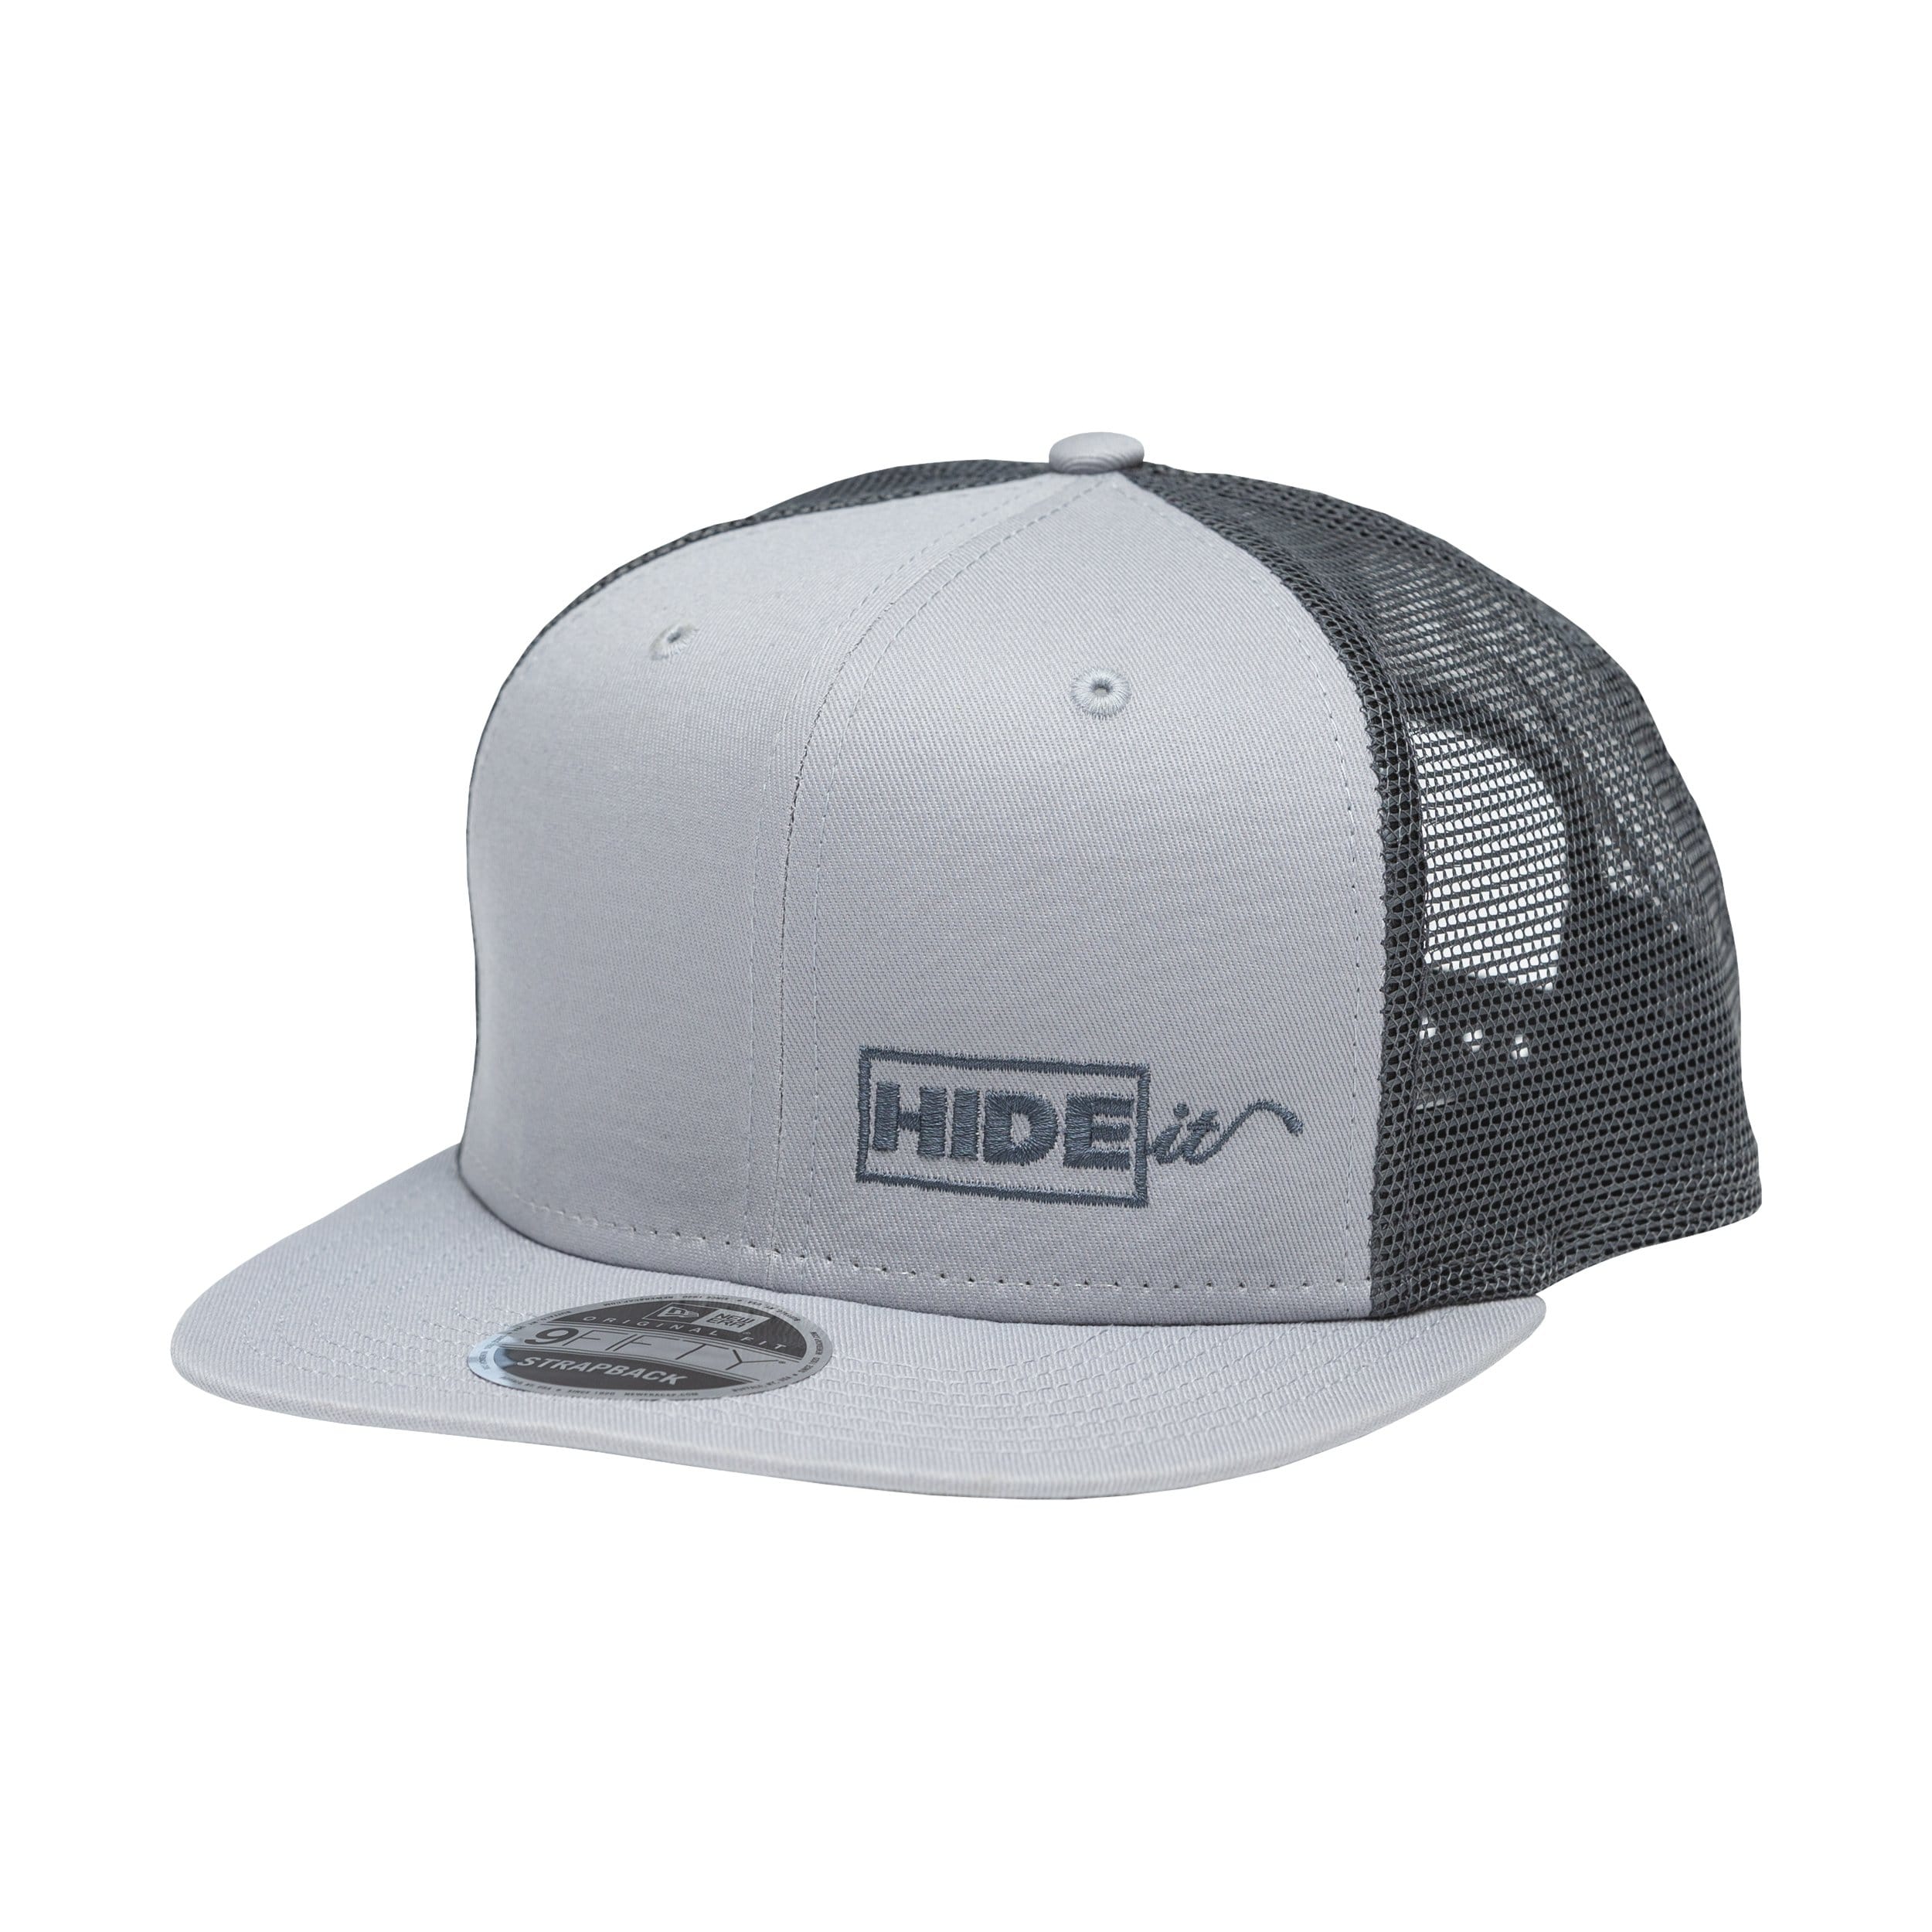 Light grey New Era Snapback with a small dark grey HIDEit Mounts logo in the bottom right of the hat.